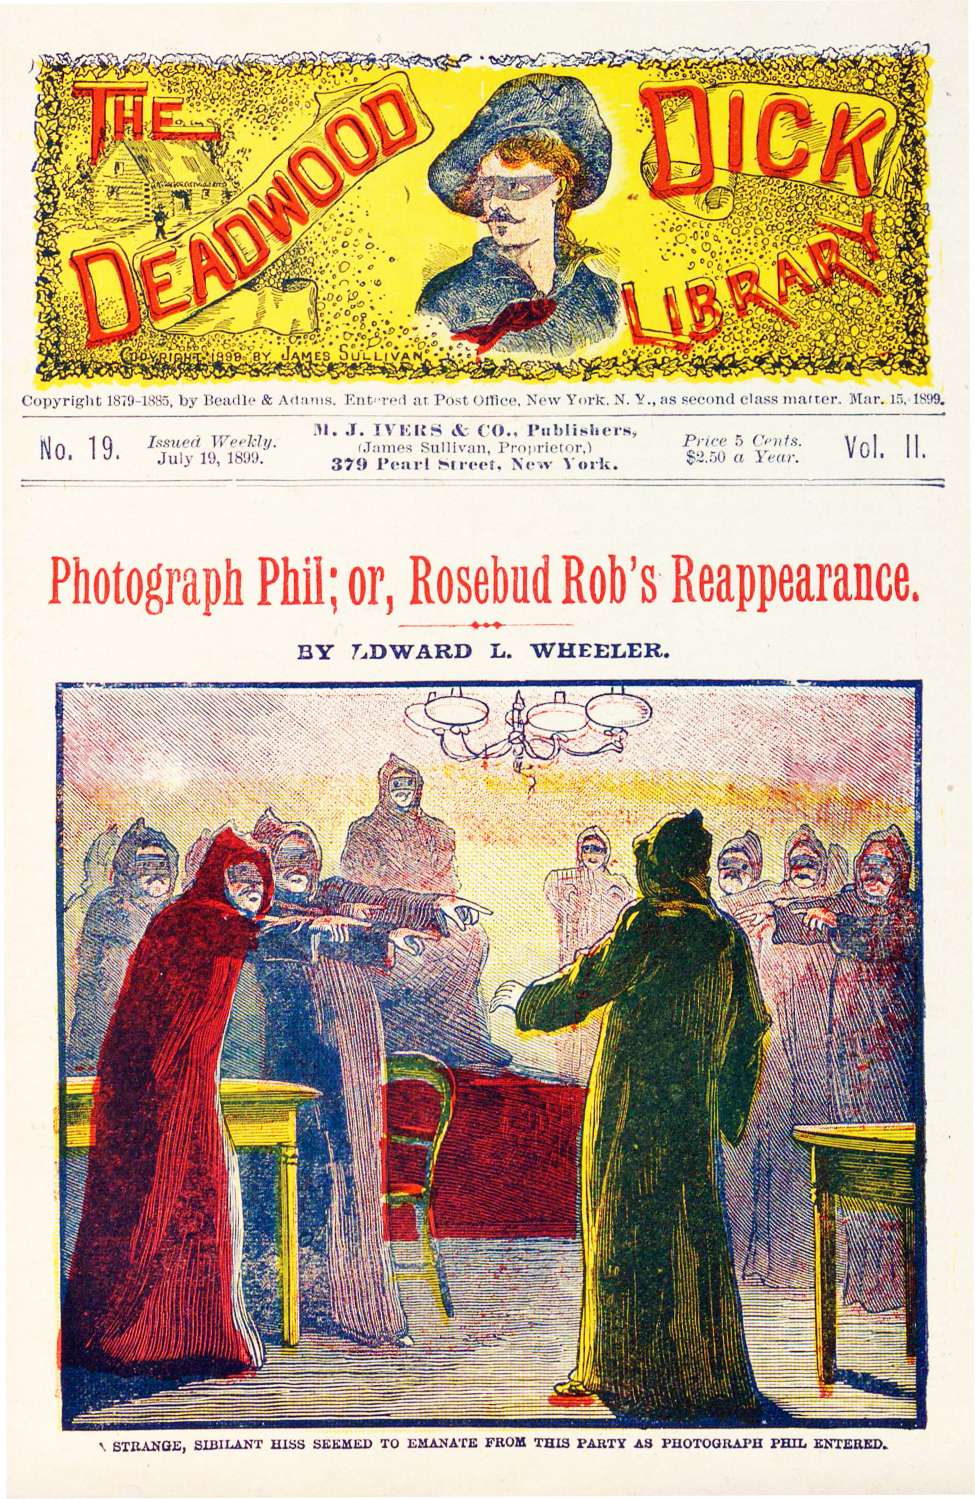 Book Cover For Deadwood Dick Library v2 19 - Photograph Phil